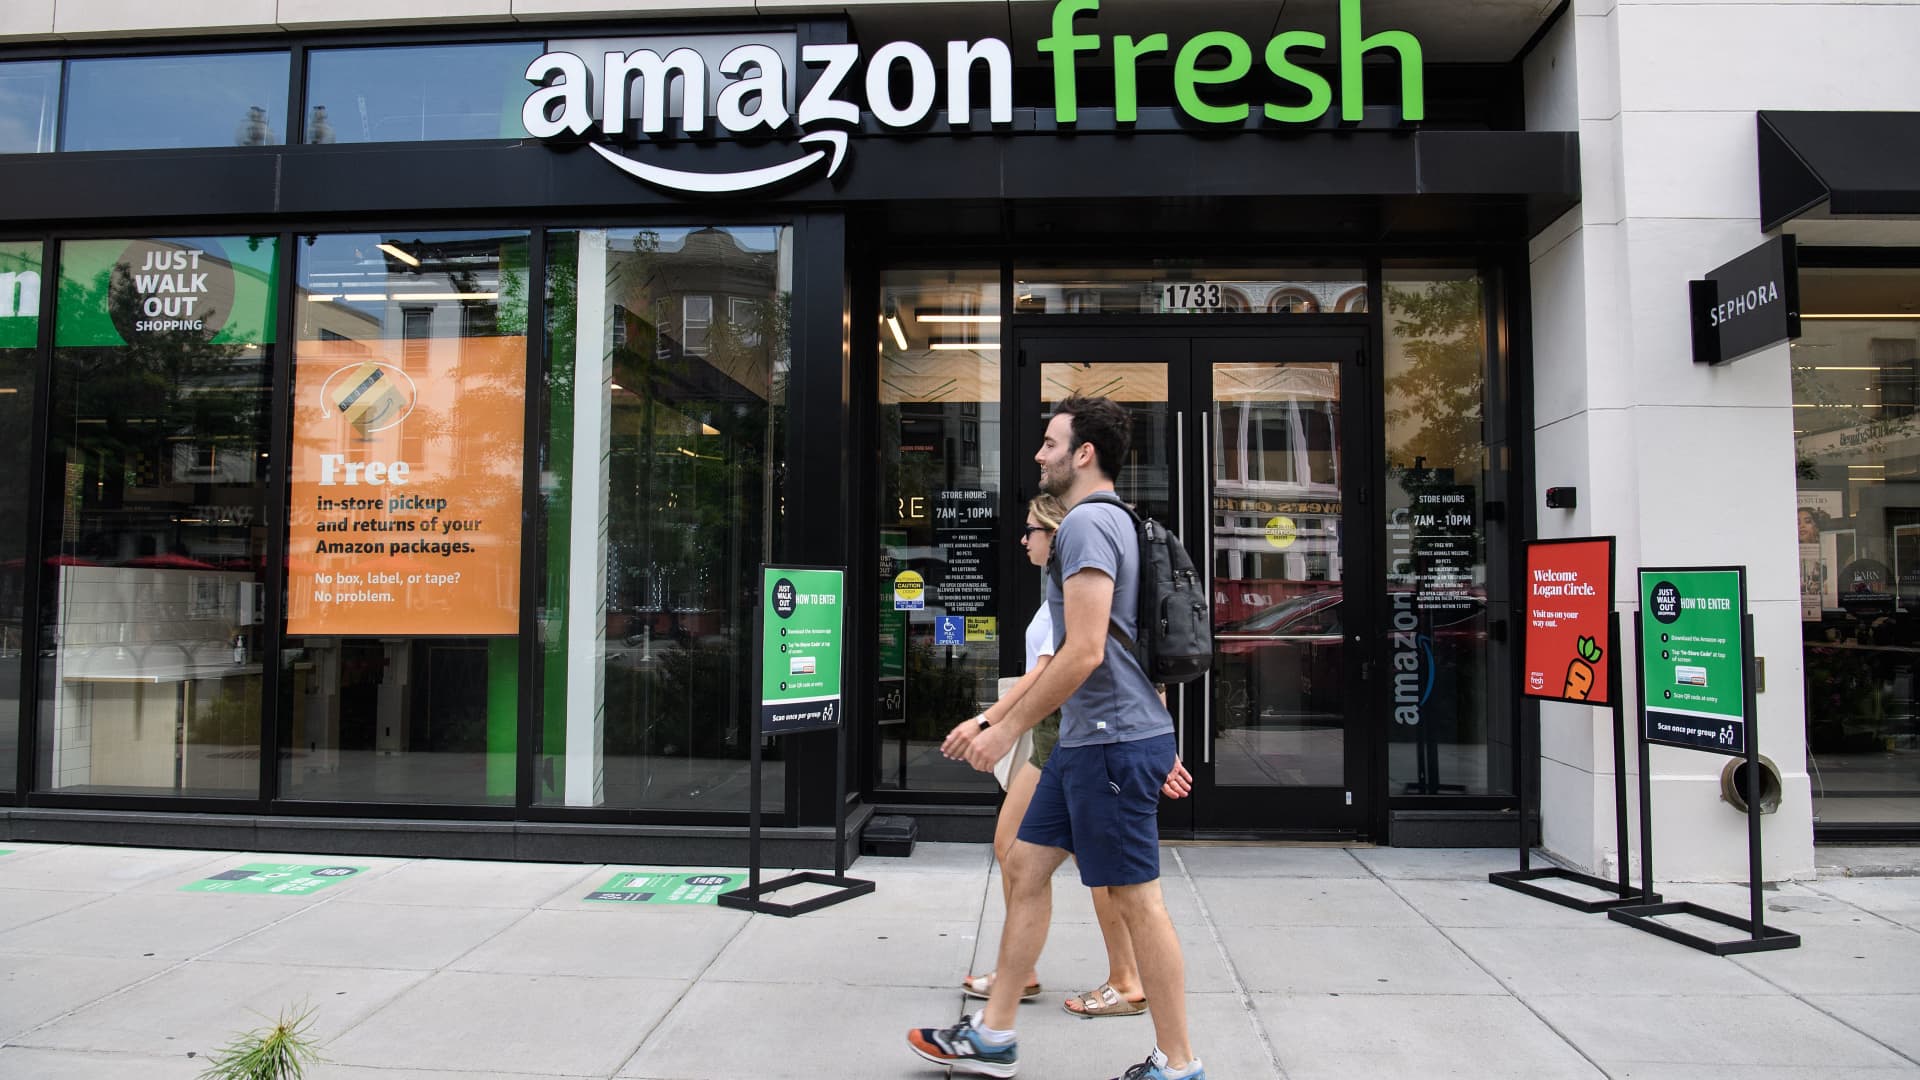 Amazon is shutting some Fresh and Go stores as the company cuts costs